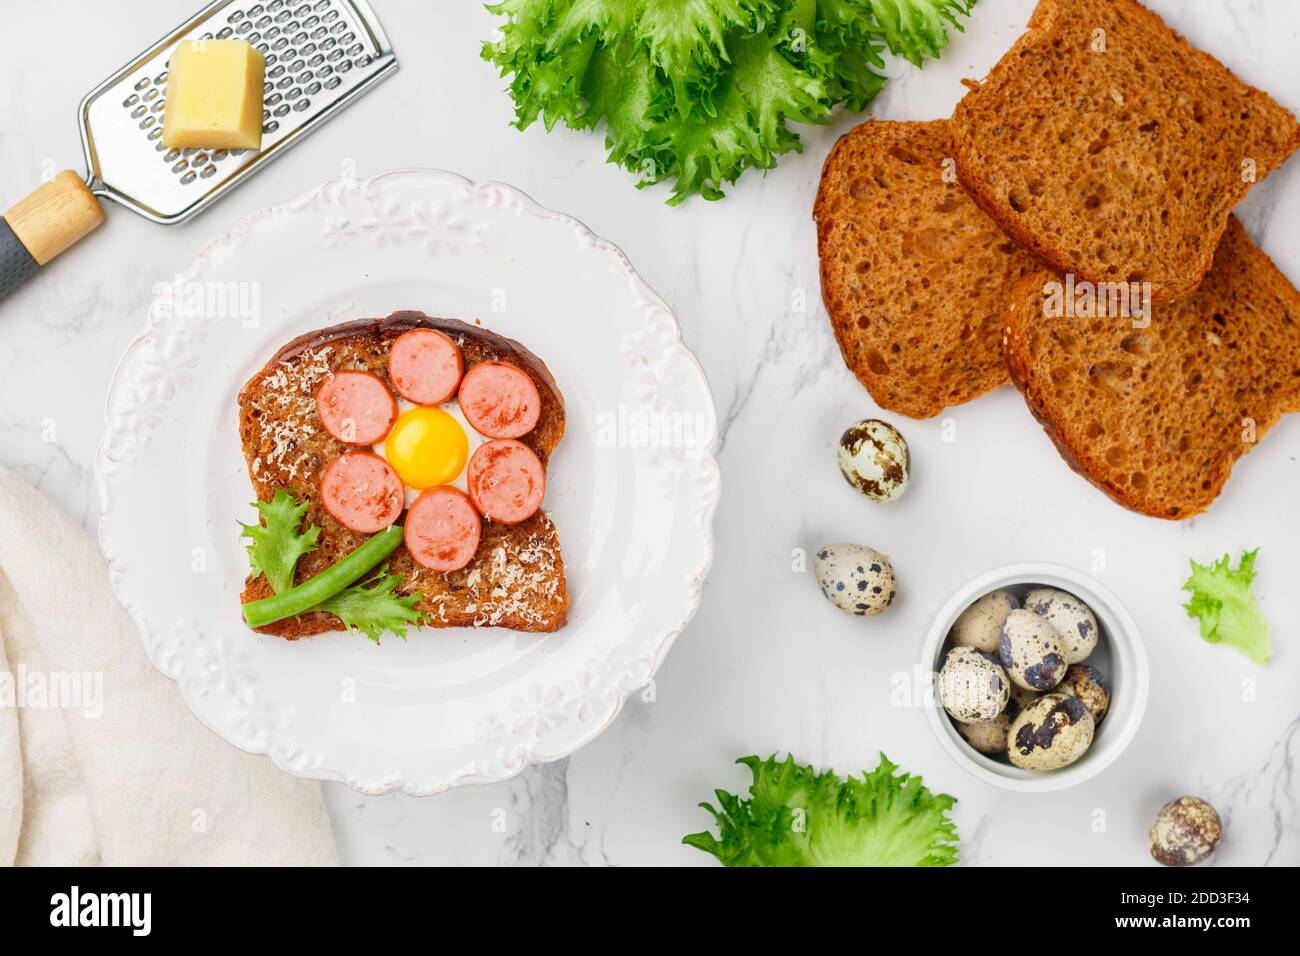 Delicious Breakfast of rye toast with cheese, sausage, quail egg, beans and lettuce. Children's sandwich. Selective focus Stock Photo